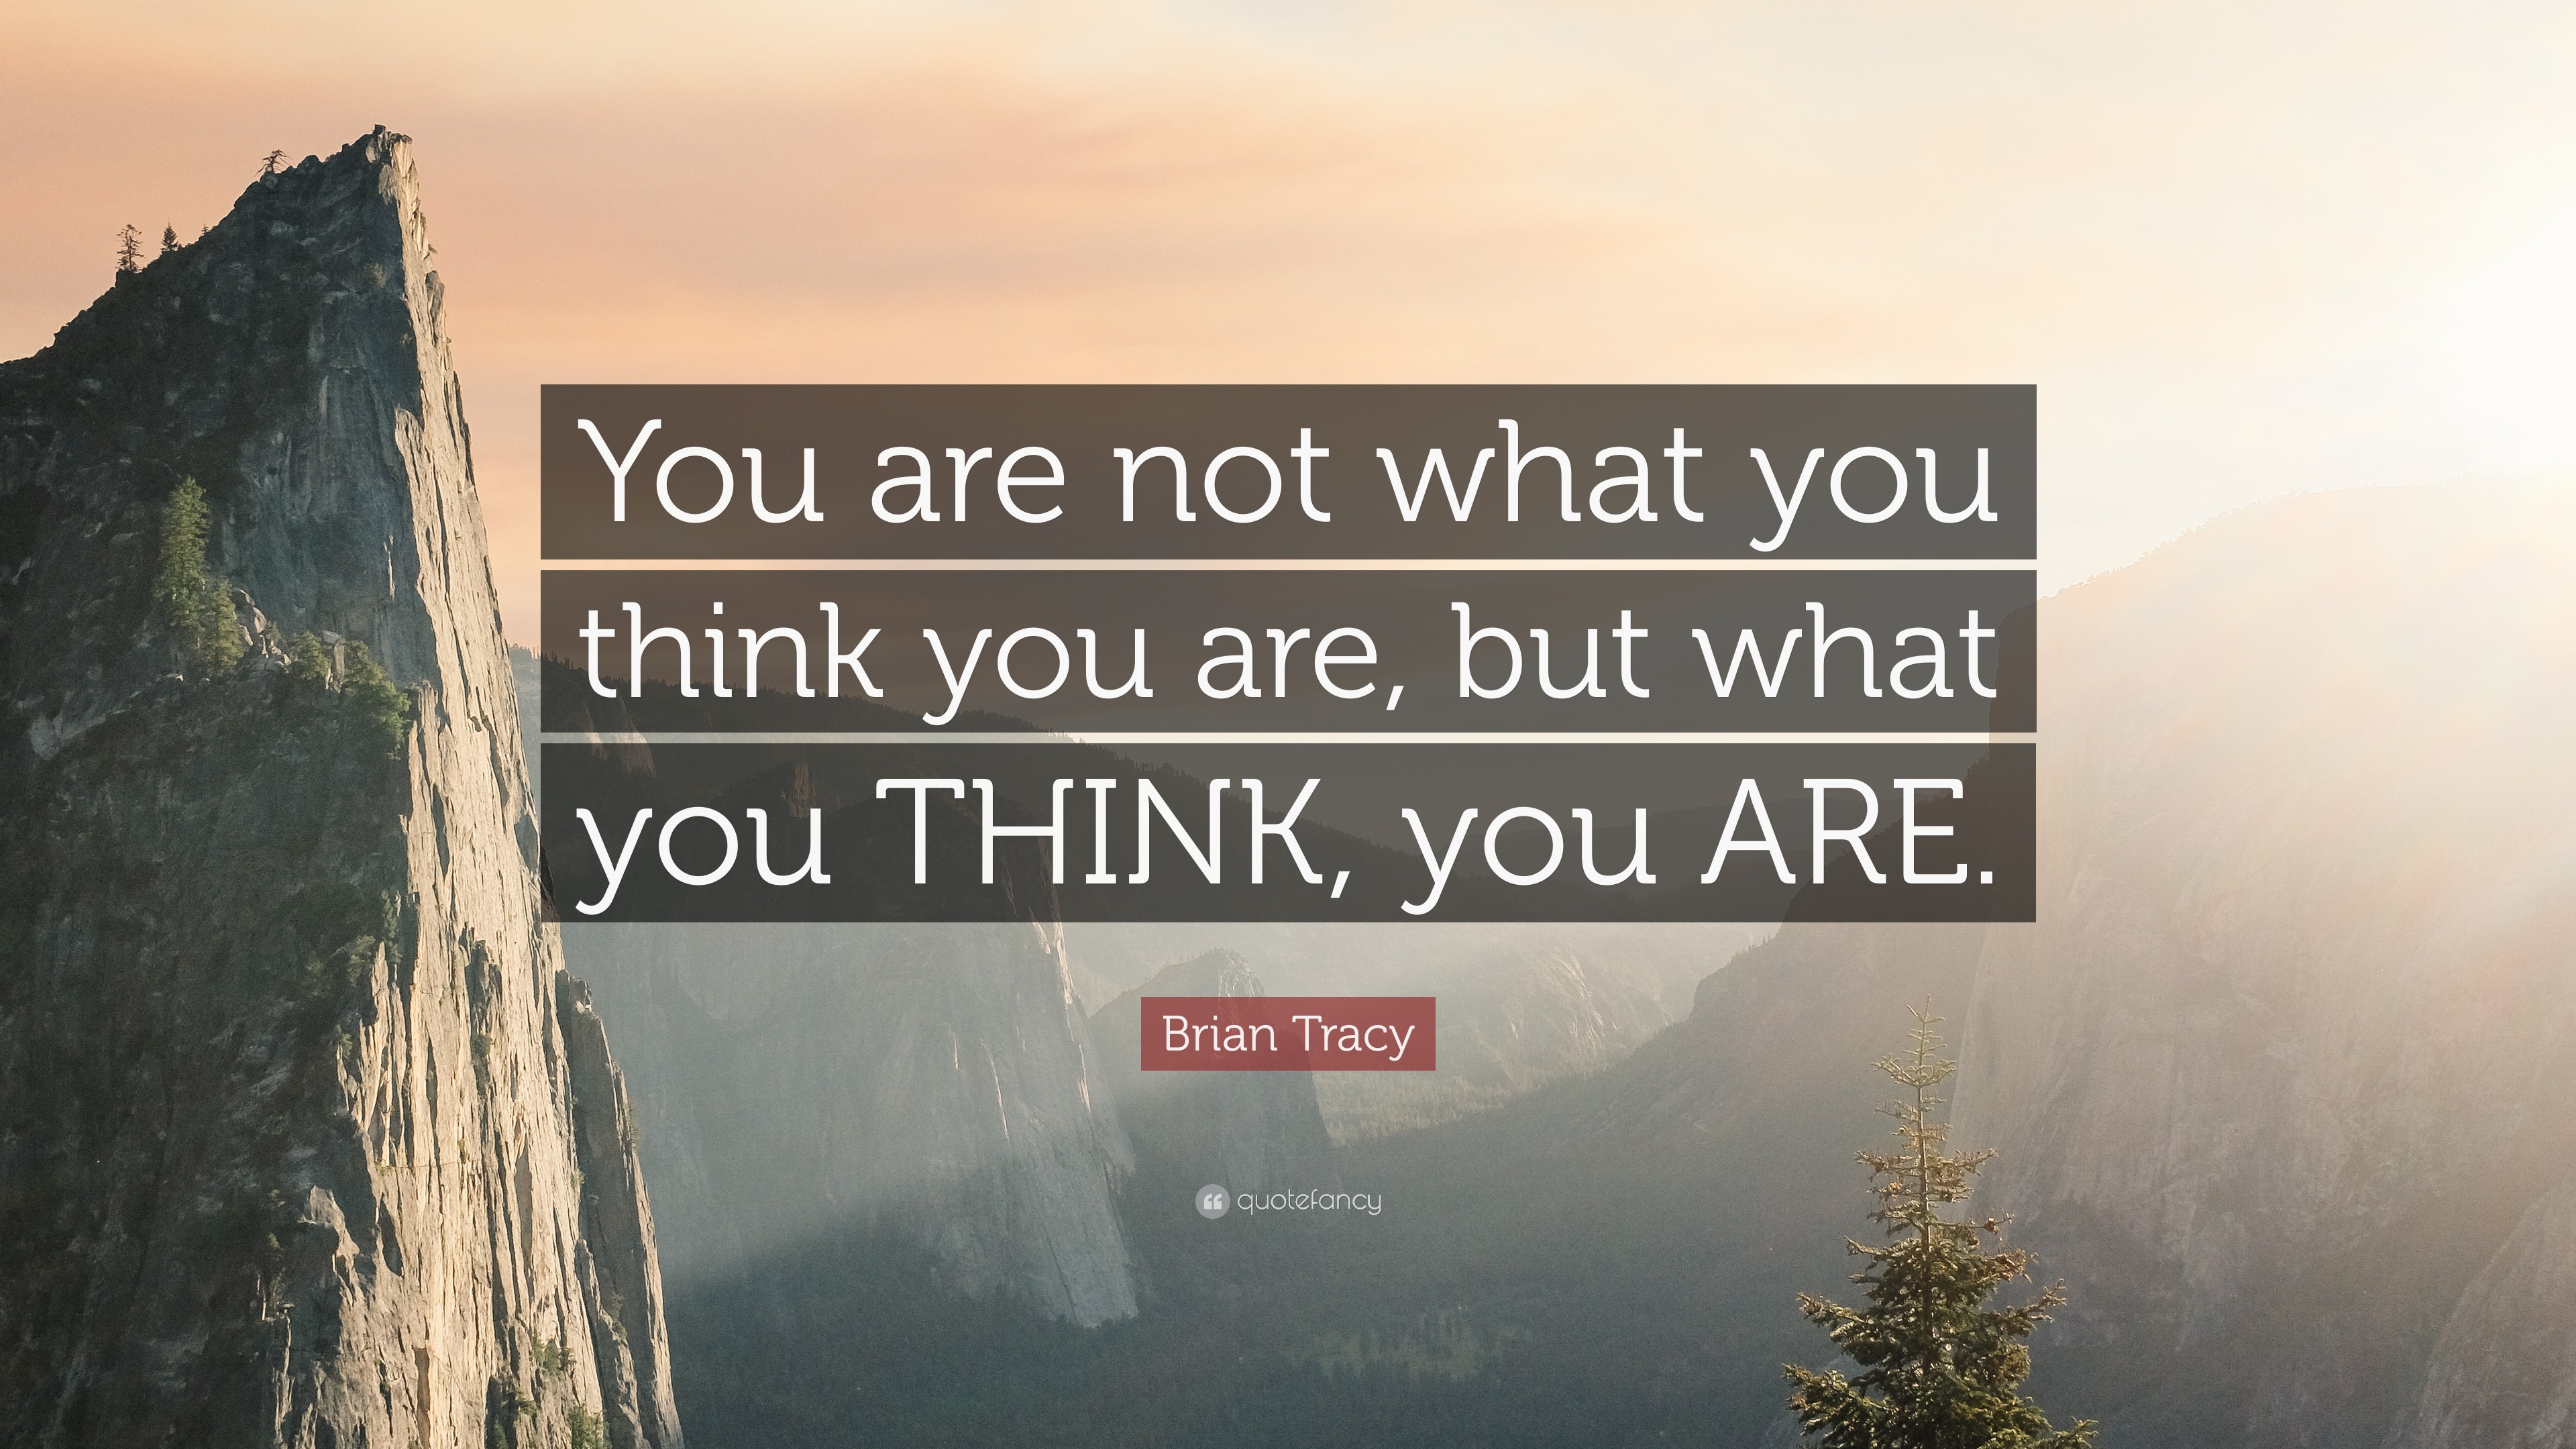 Brian Tracy Quote: “You Are Not What You Think You Are, But What You Think, You